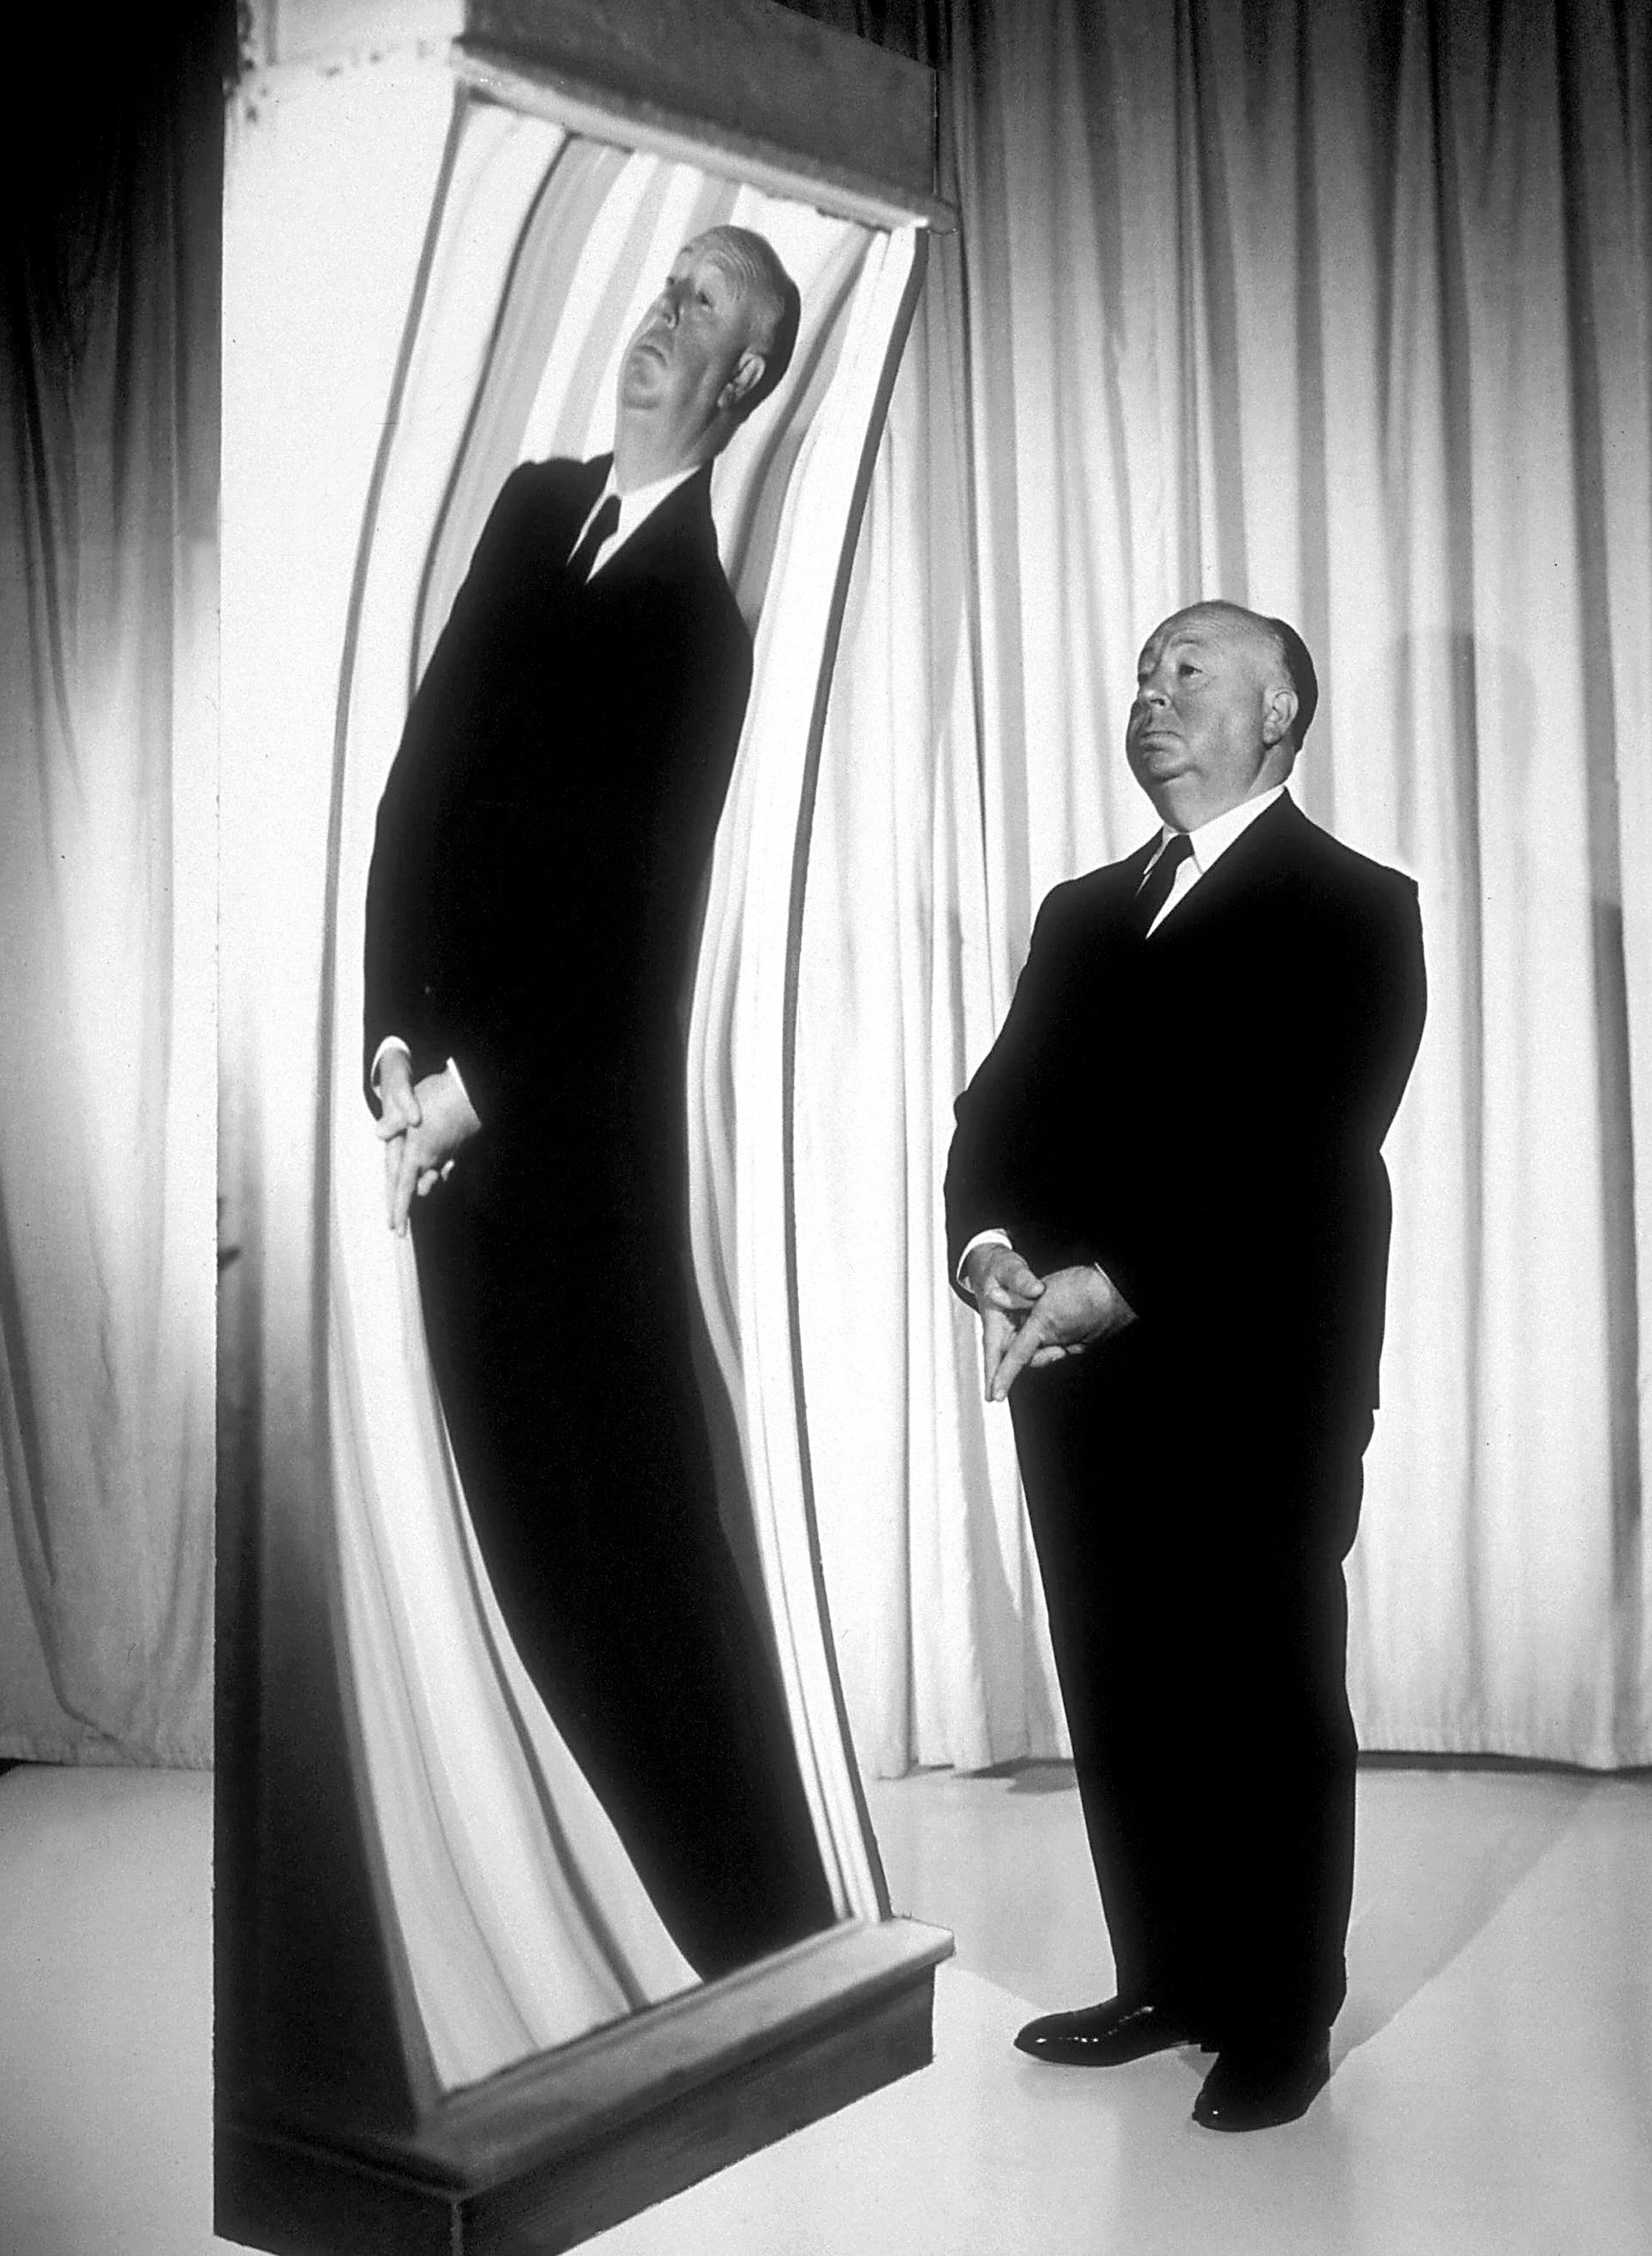 Unknown Black and White Photograph - Alfred Hitchcock in Funhouse Mirror Globe Photos Fine Art Print